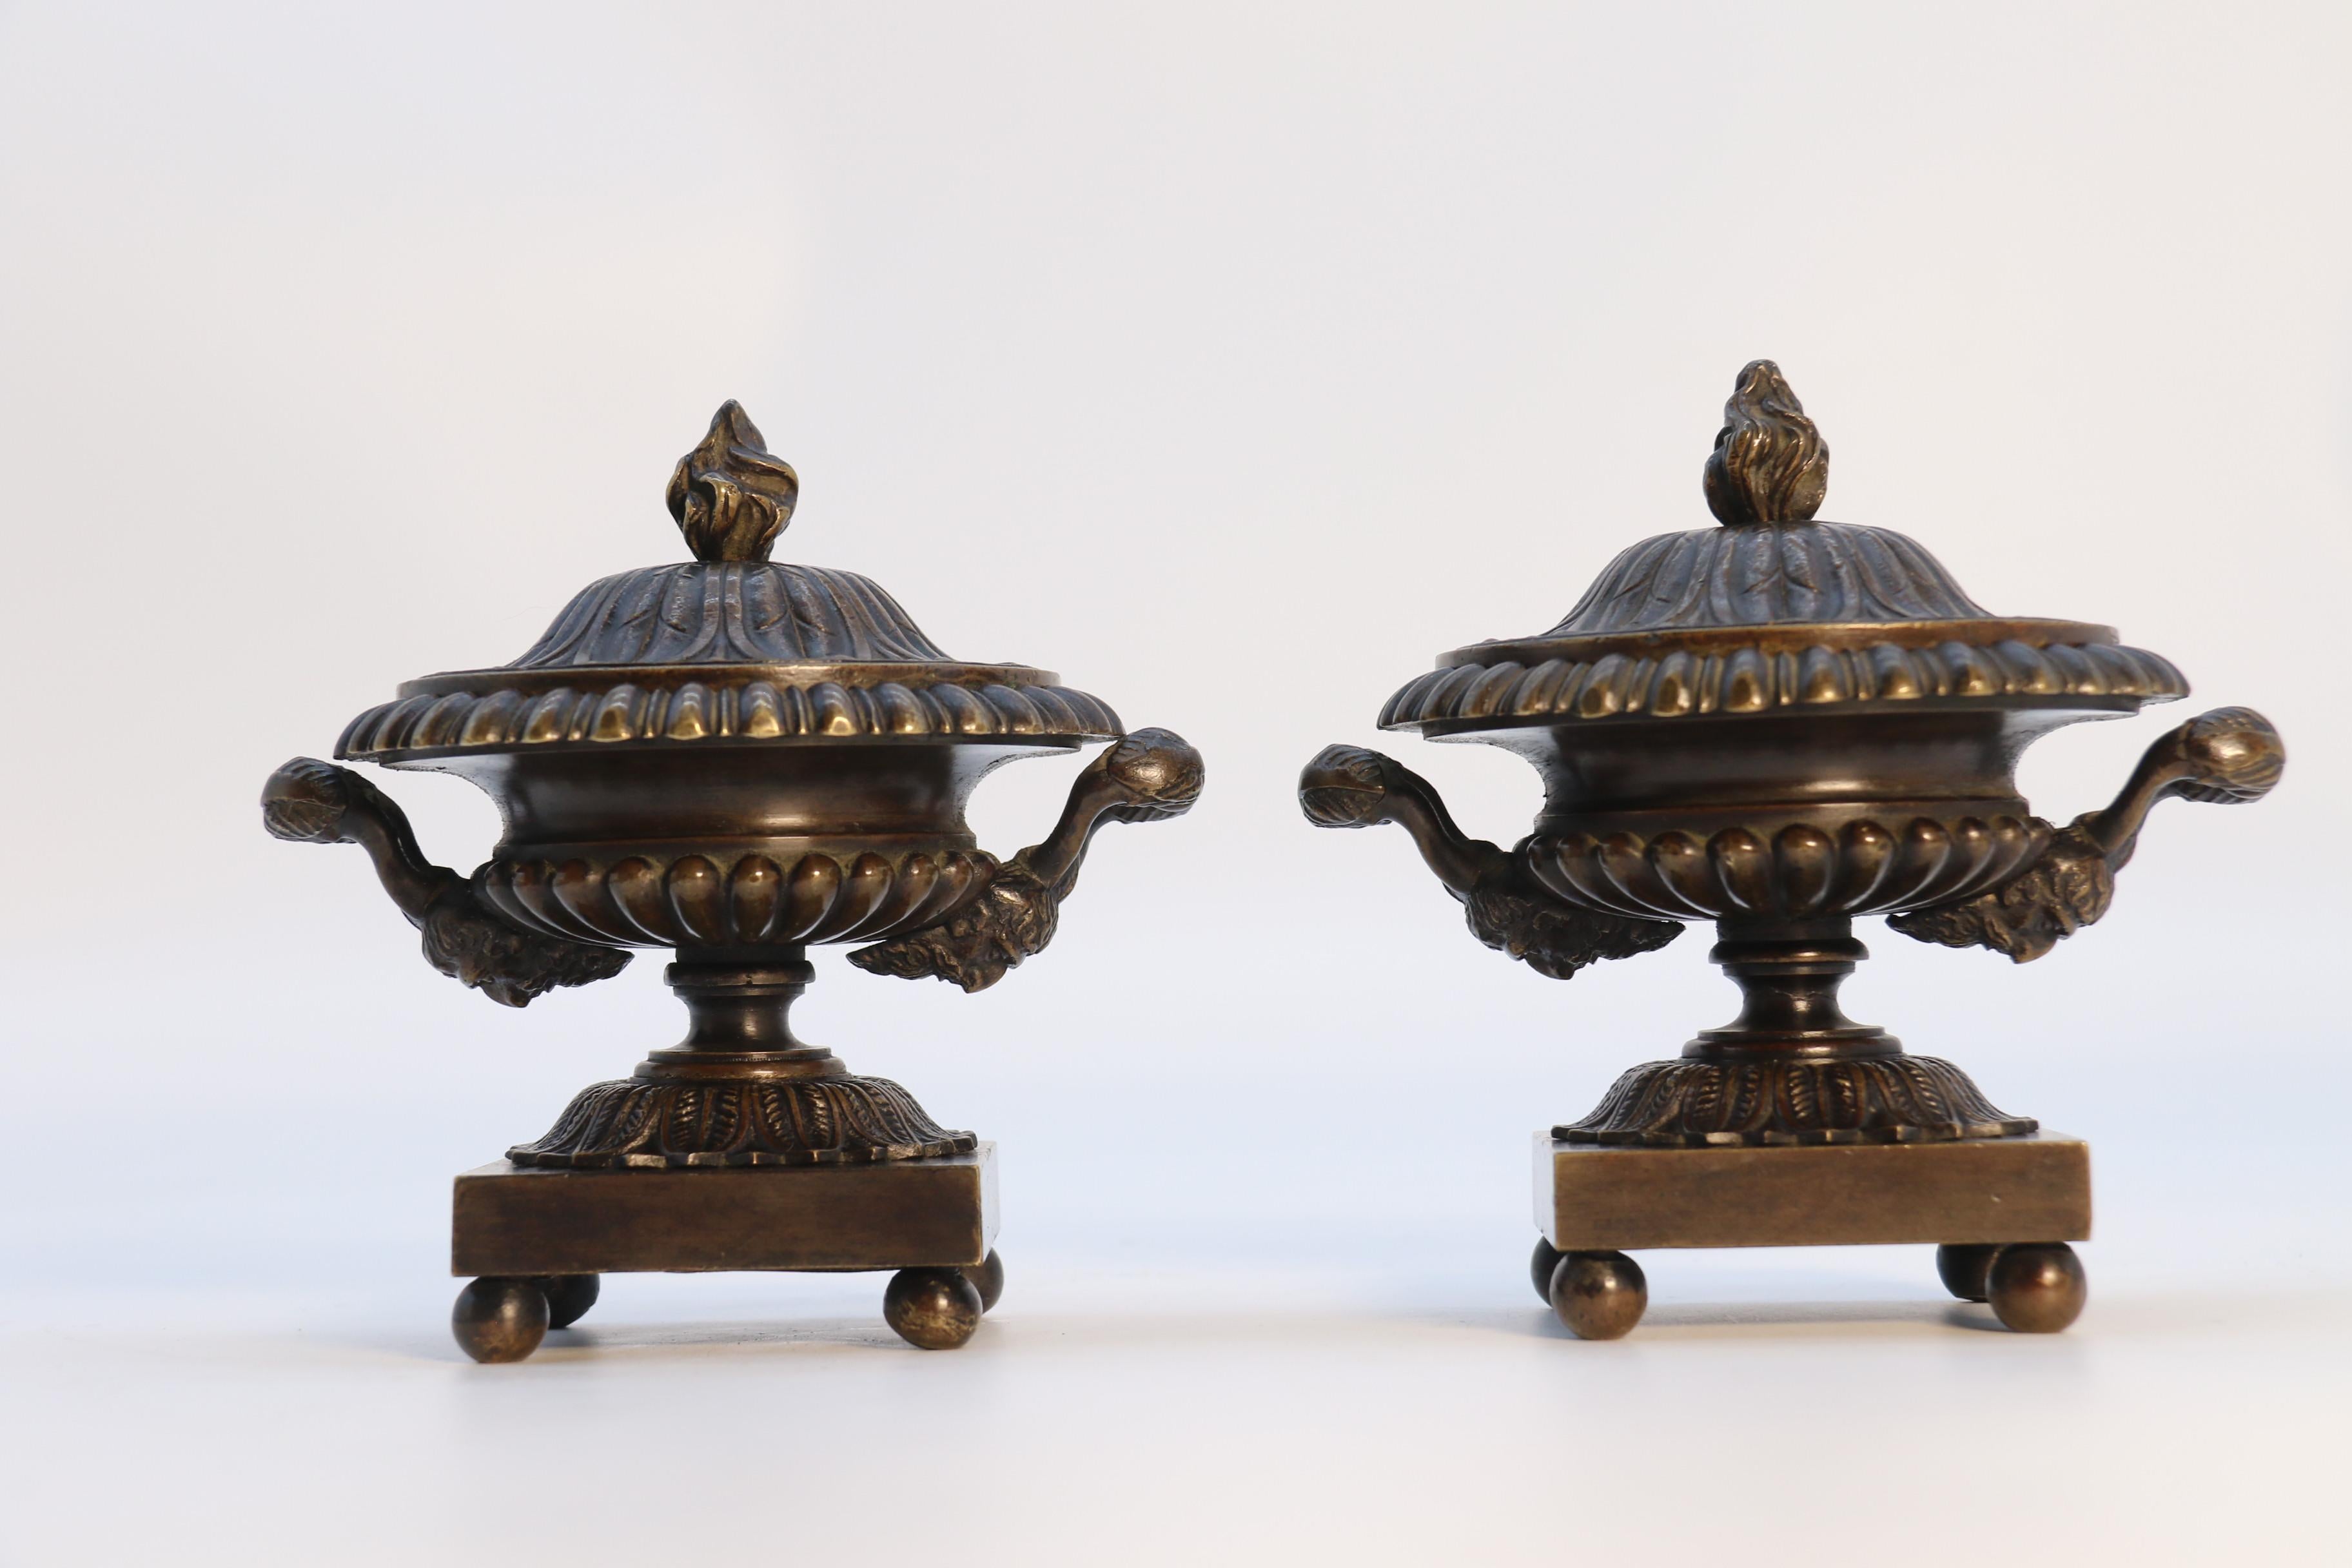 This very elegant pair of English Regency period classical bronze urns are of small proportions and made to a very stylish and sophisticated design. They stand on plain square bases which are raised up onto four small ball shaped feet. The lower